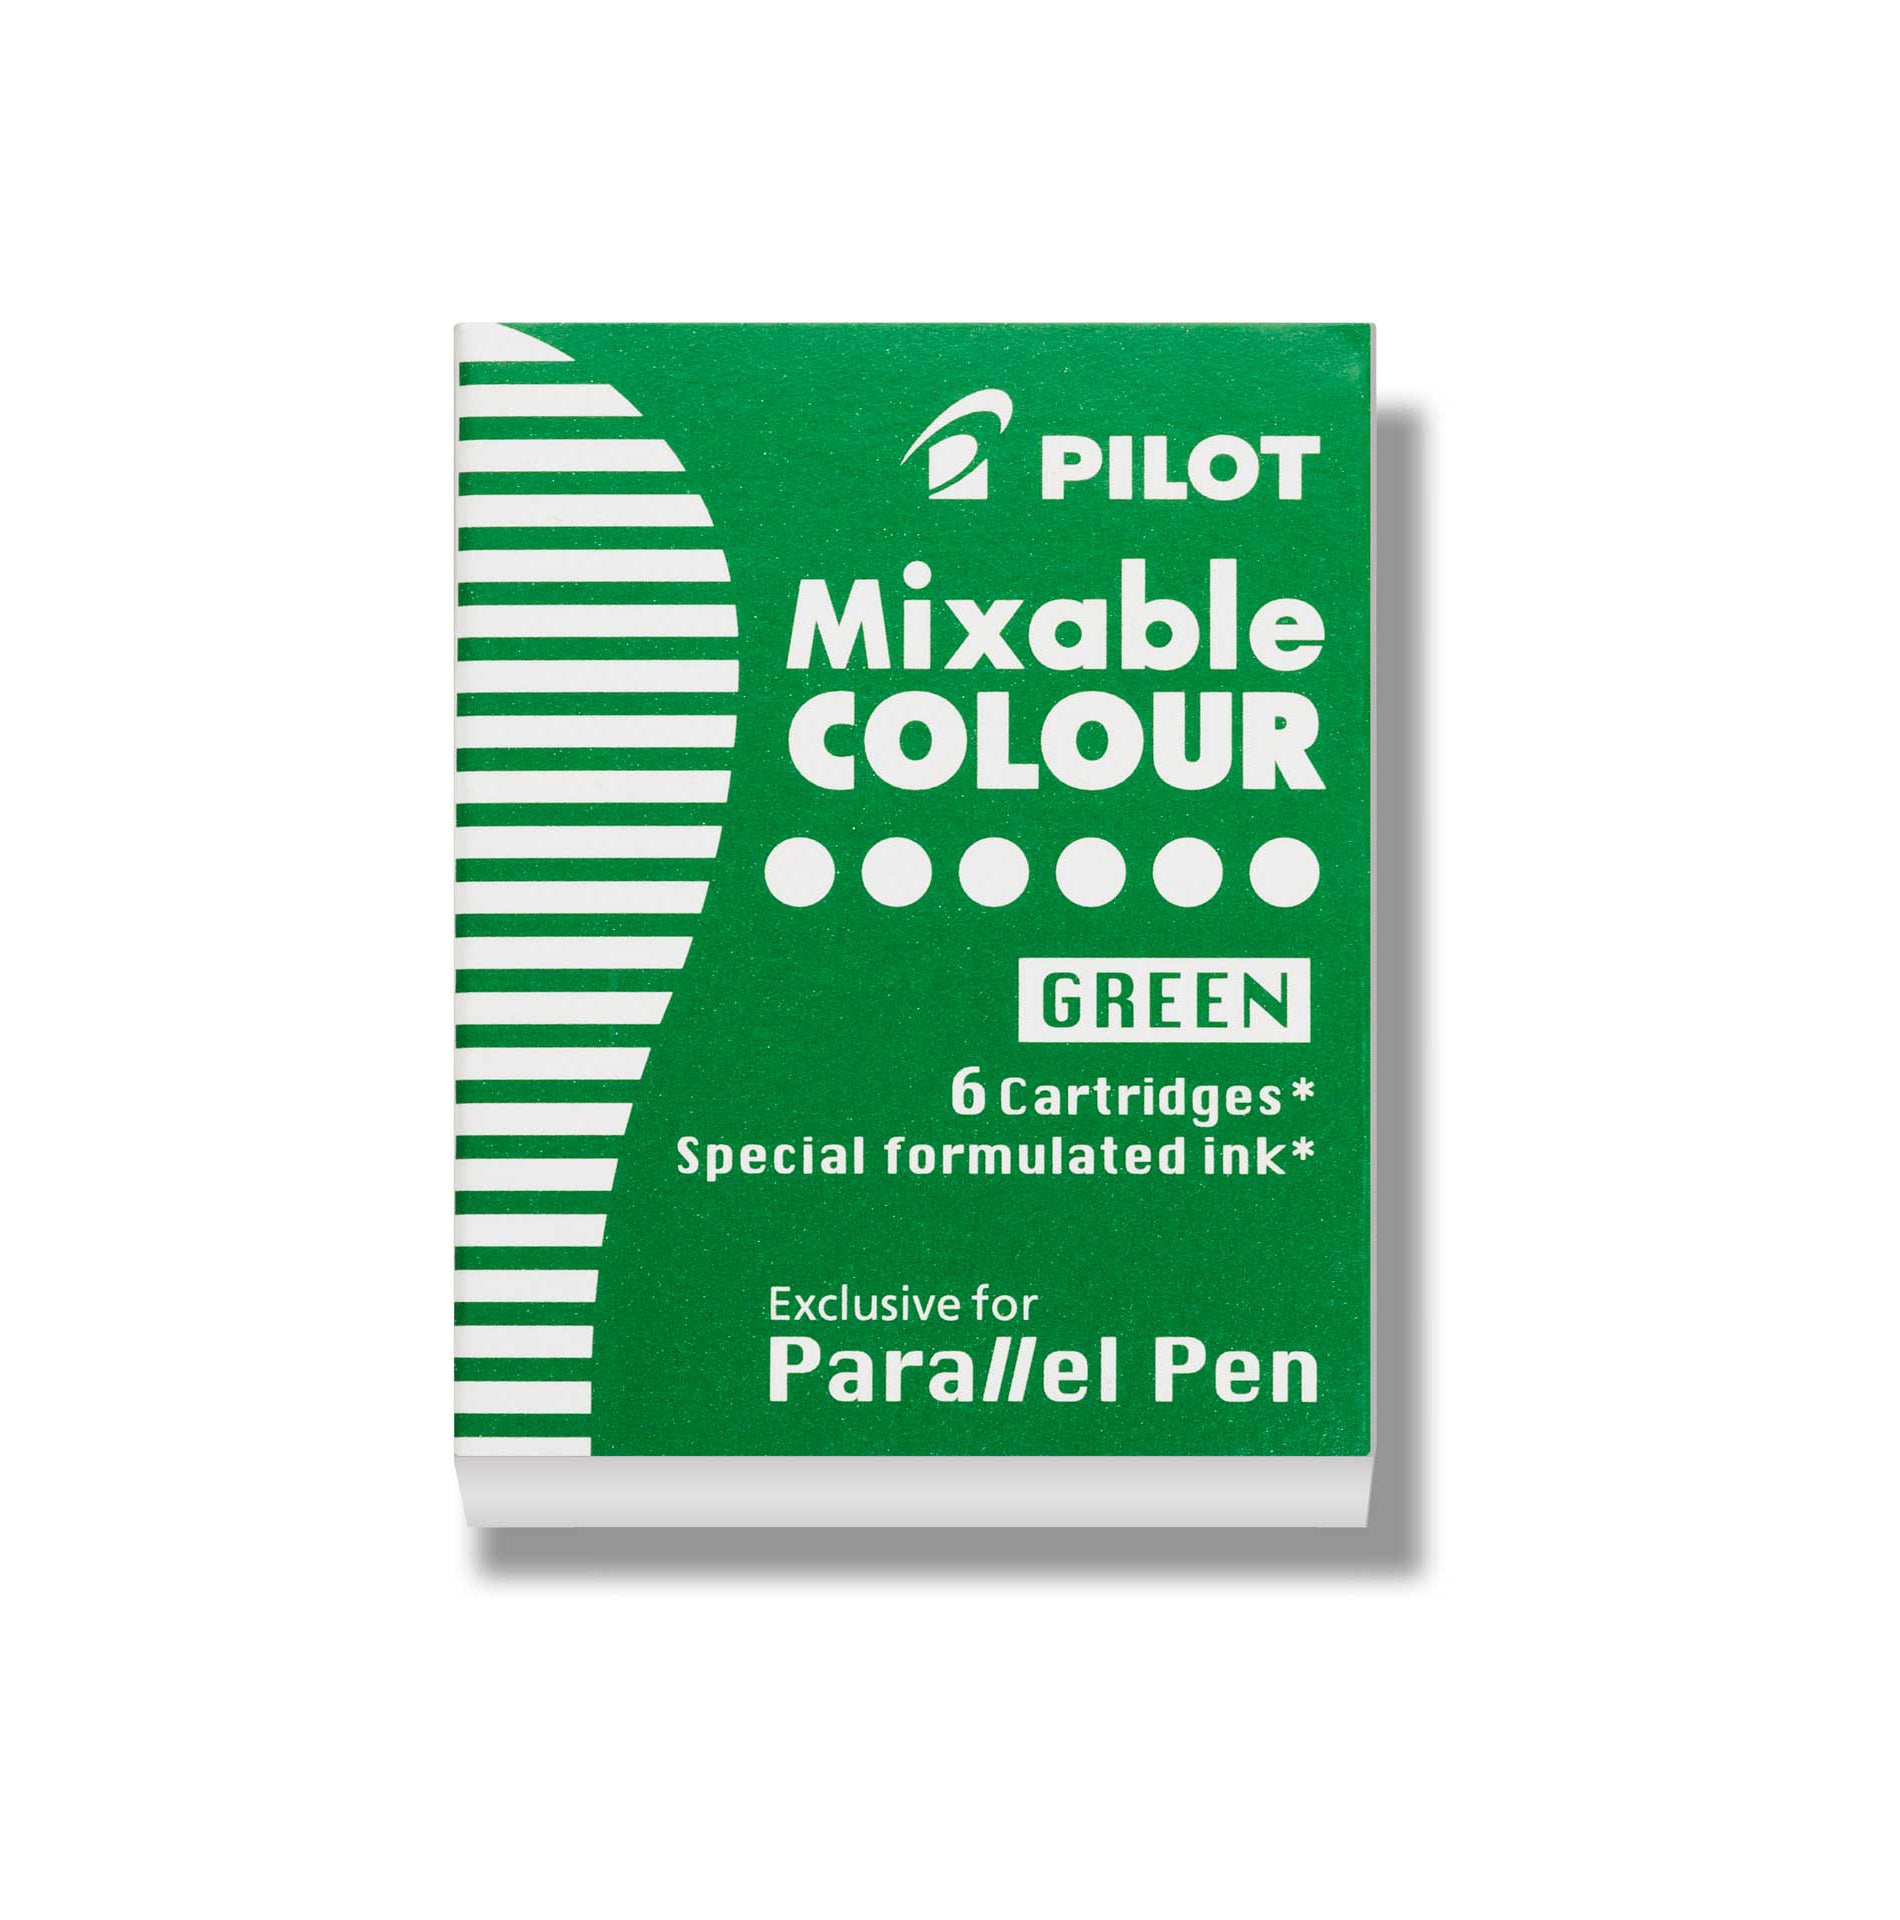 Pilot Cartridge Ink - Mixable Colour - Green